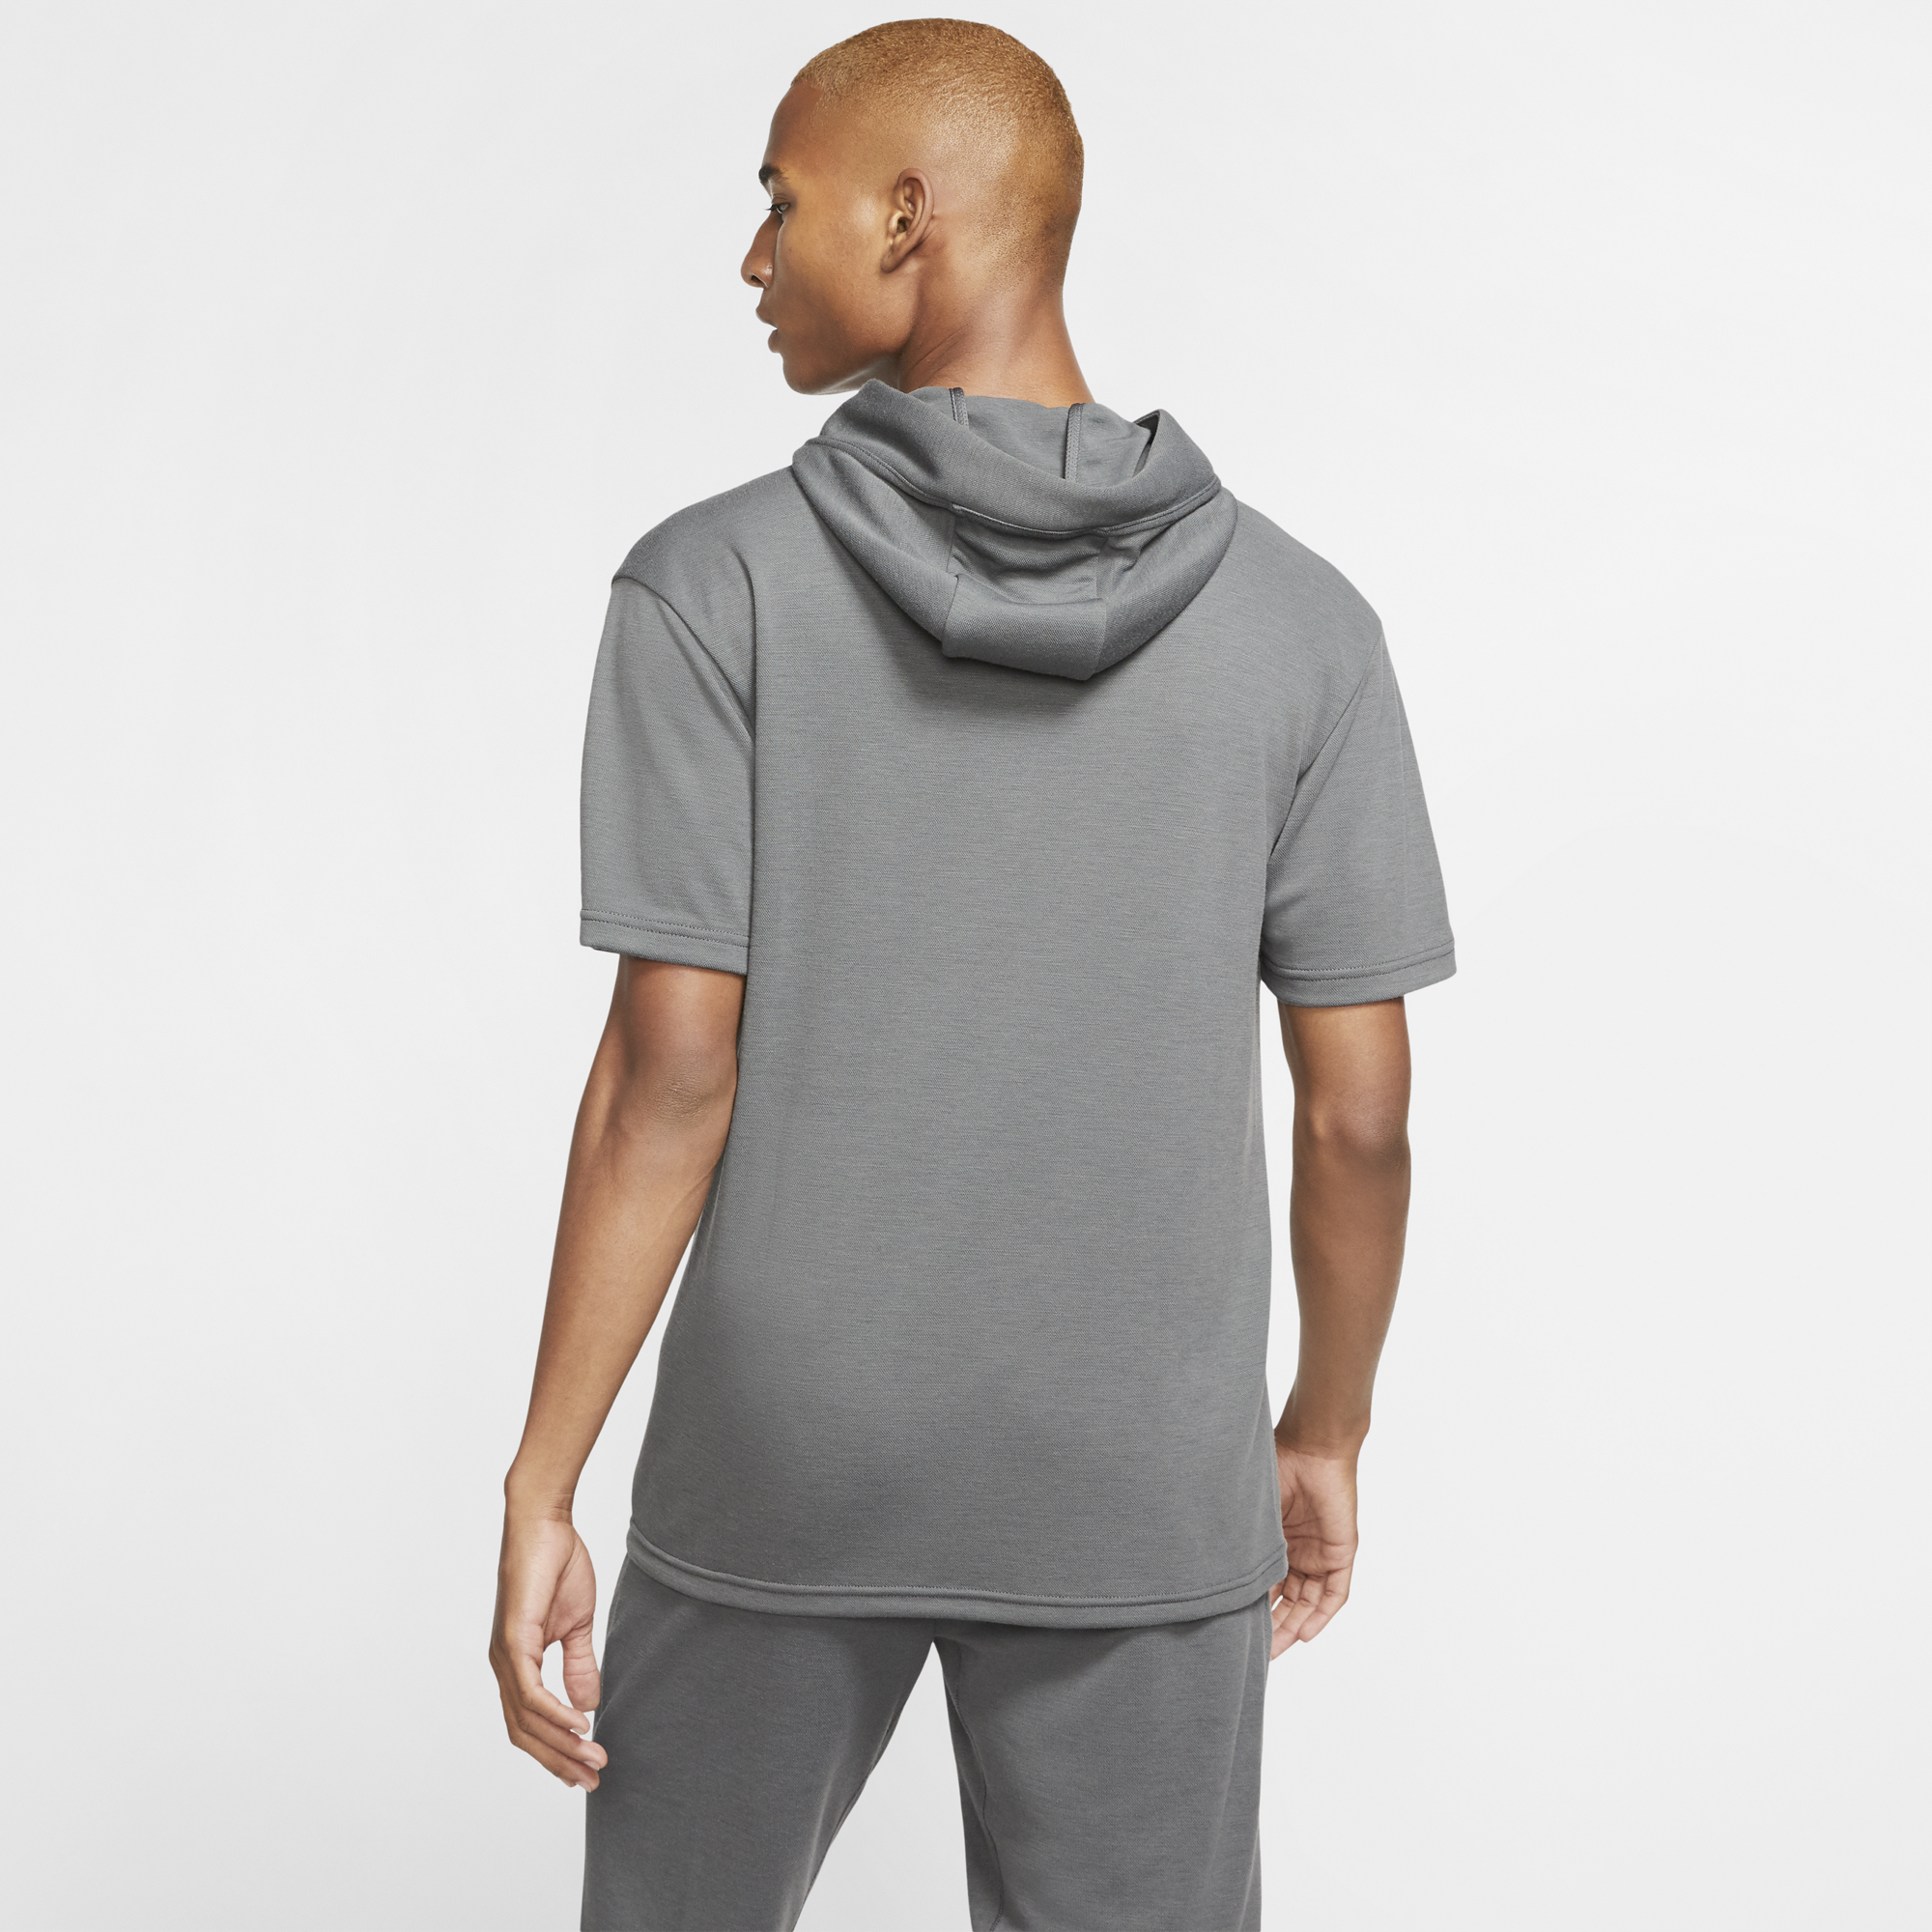 New Arrival: Nike's Yoga Collection